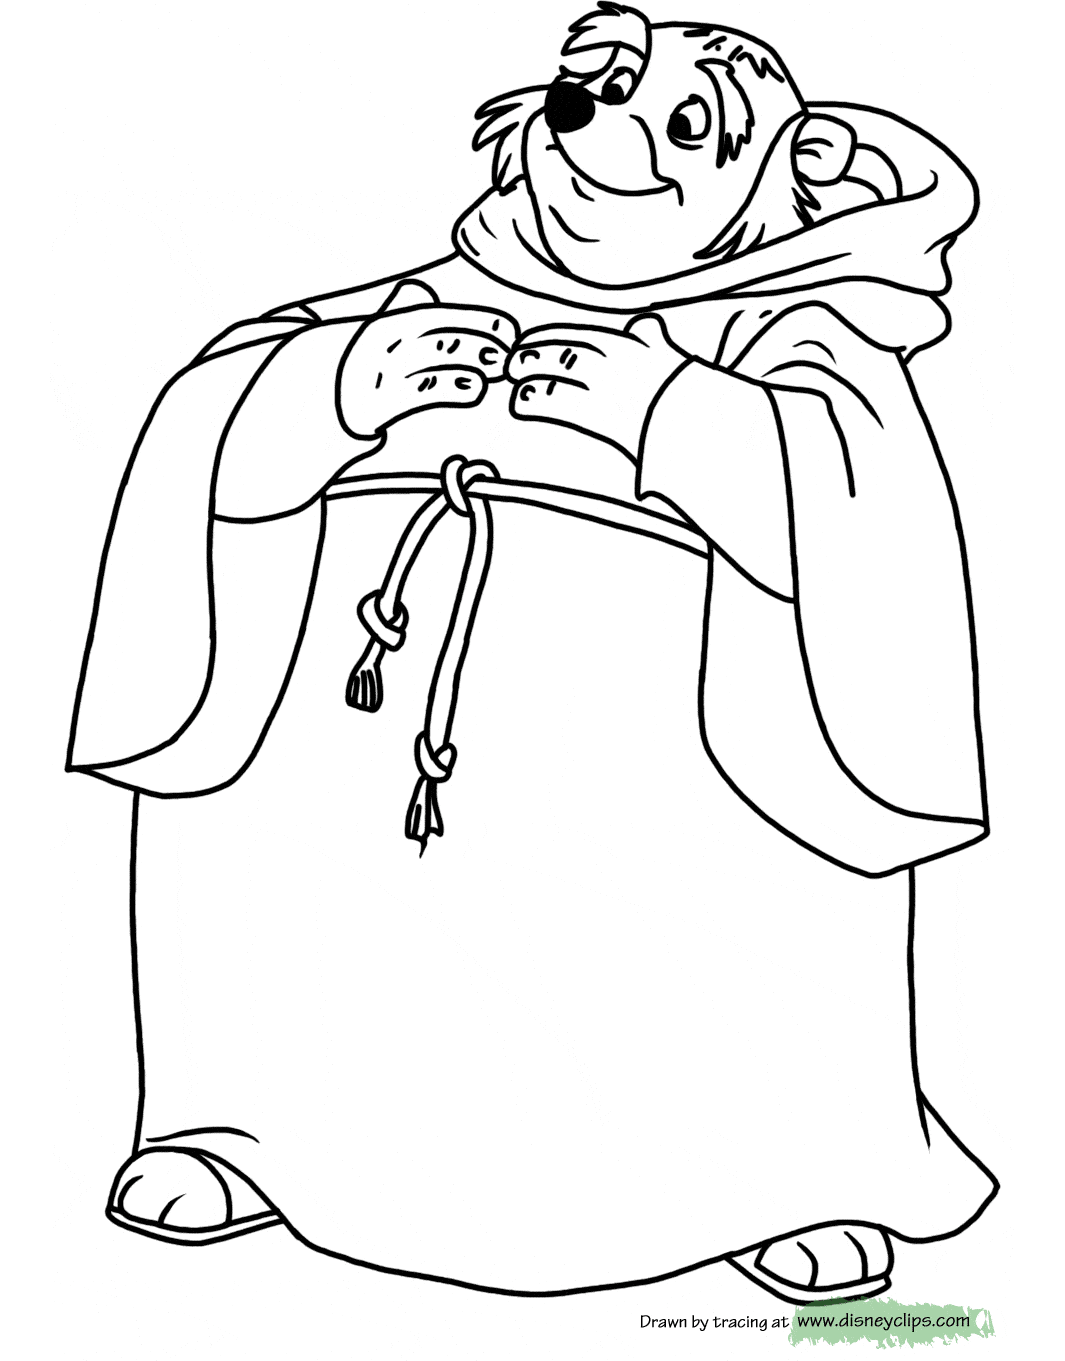 Robin Hood Coloring Pages 2 Disneyclipscom